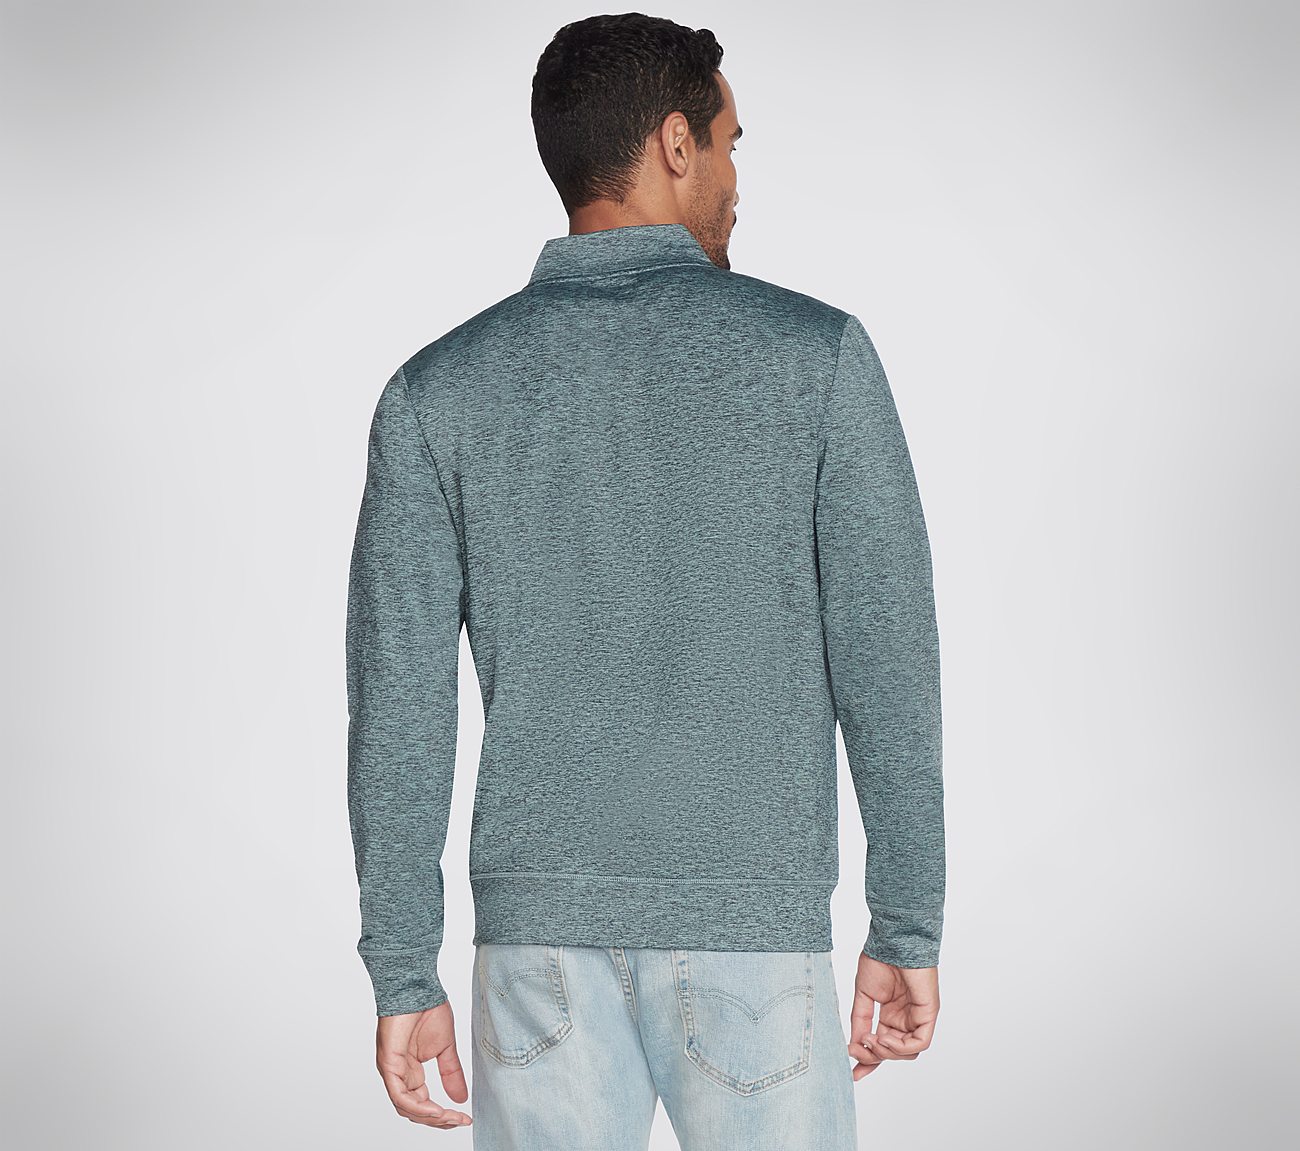 SKECH-KNITS ULTRA GO HOODLESS, TEAL/BLUE Apparels Top View